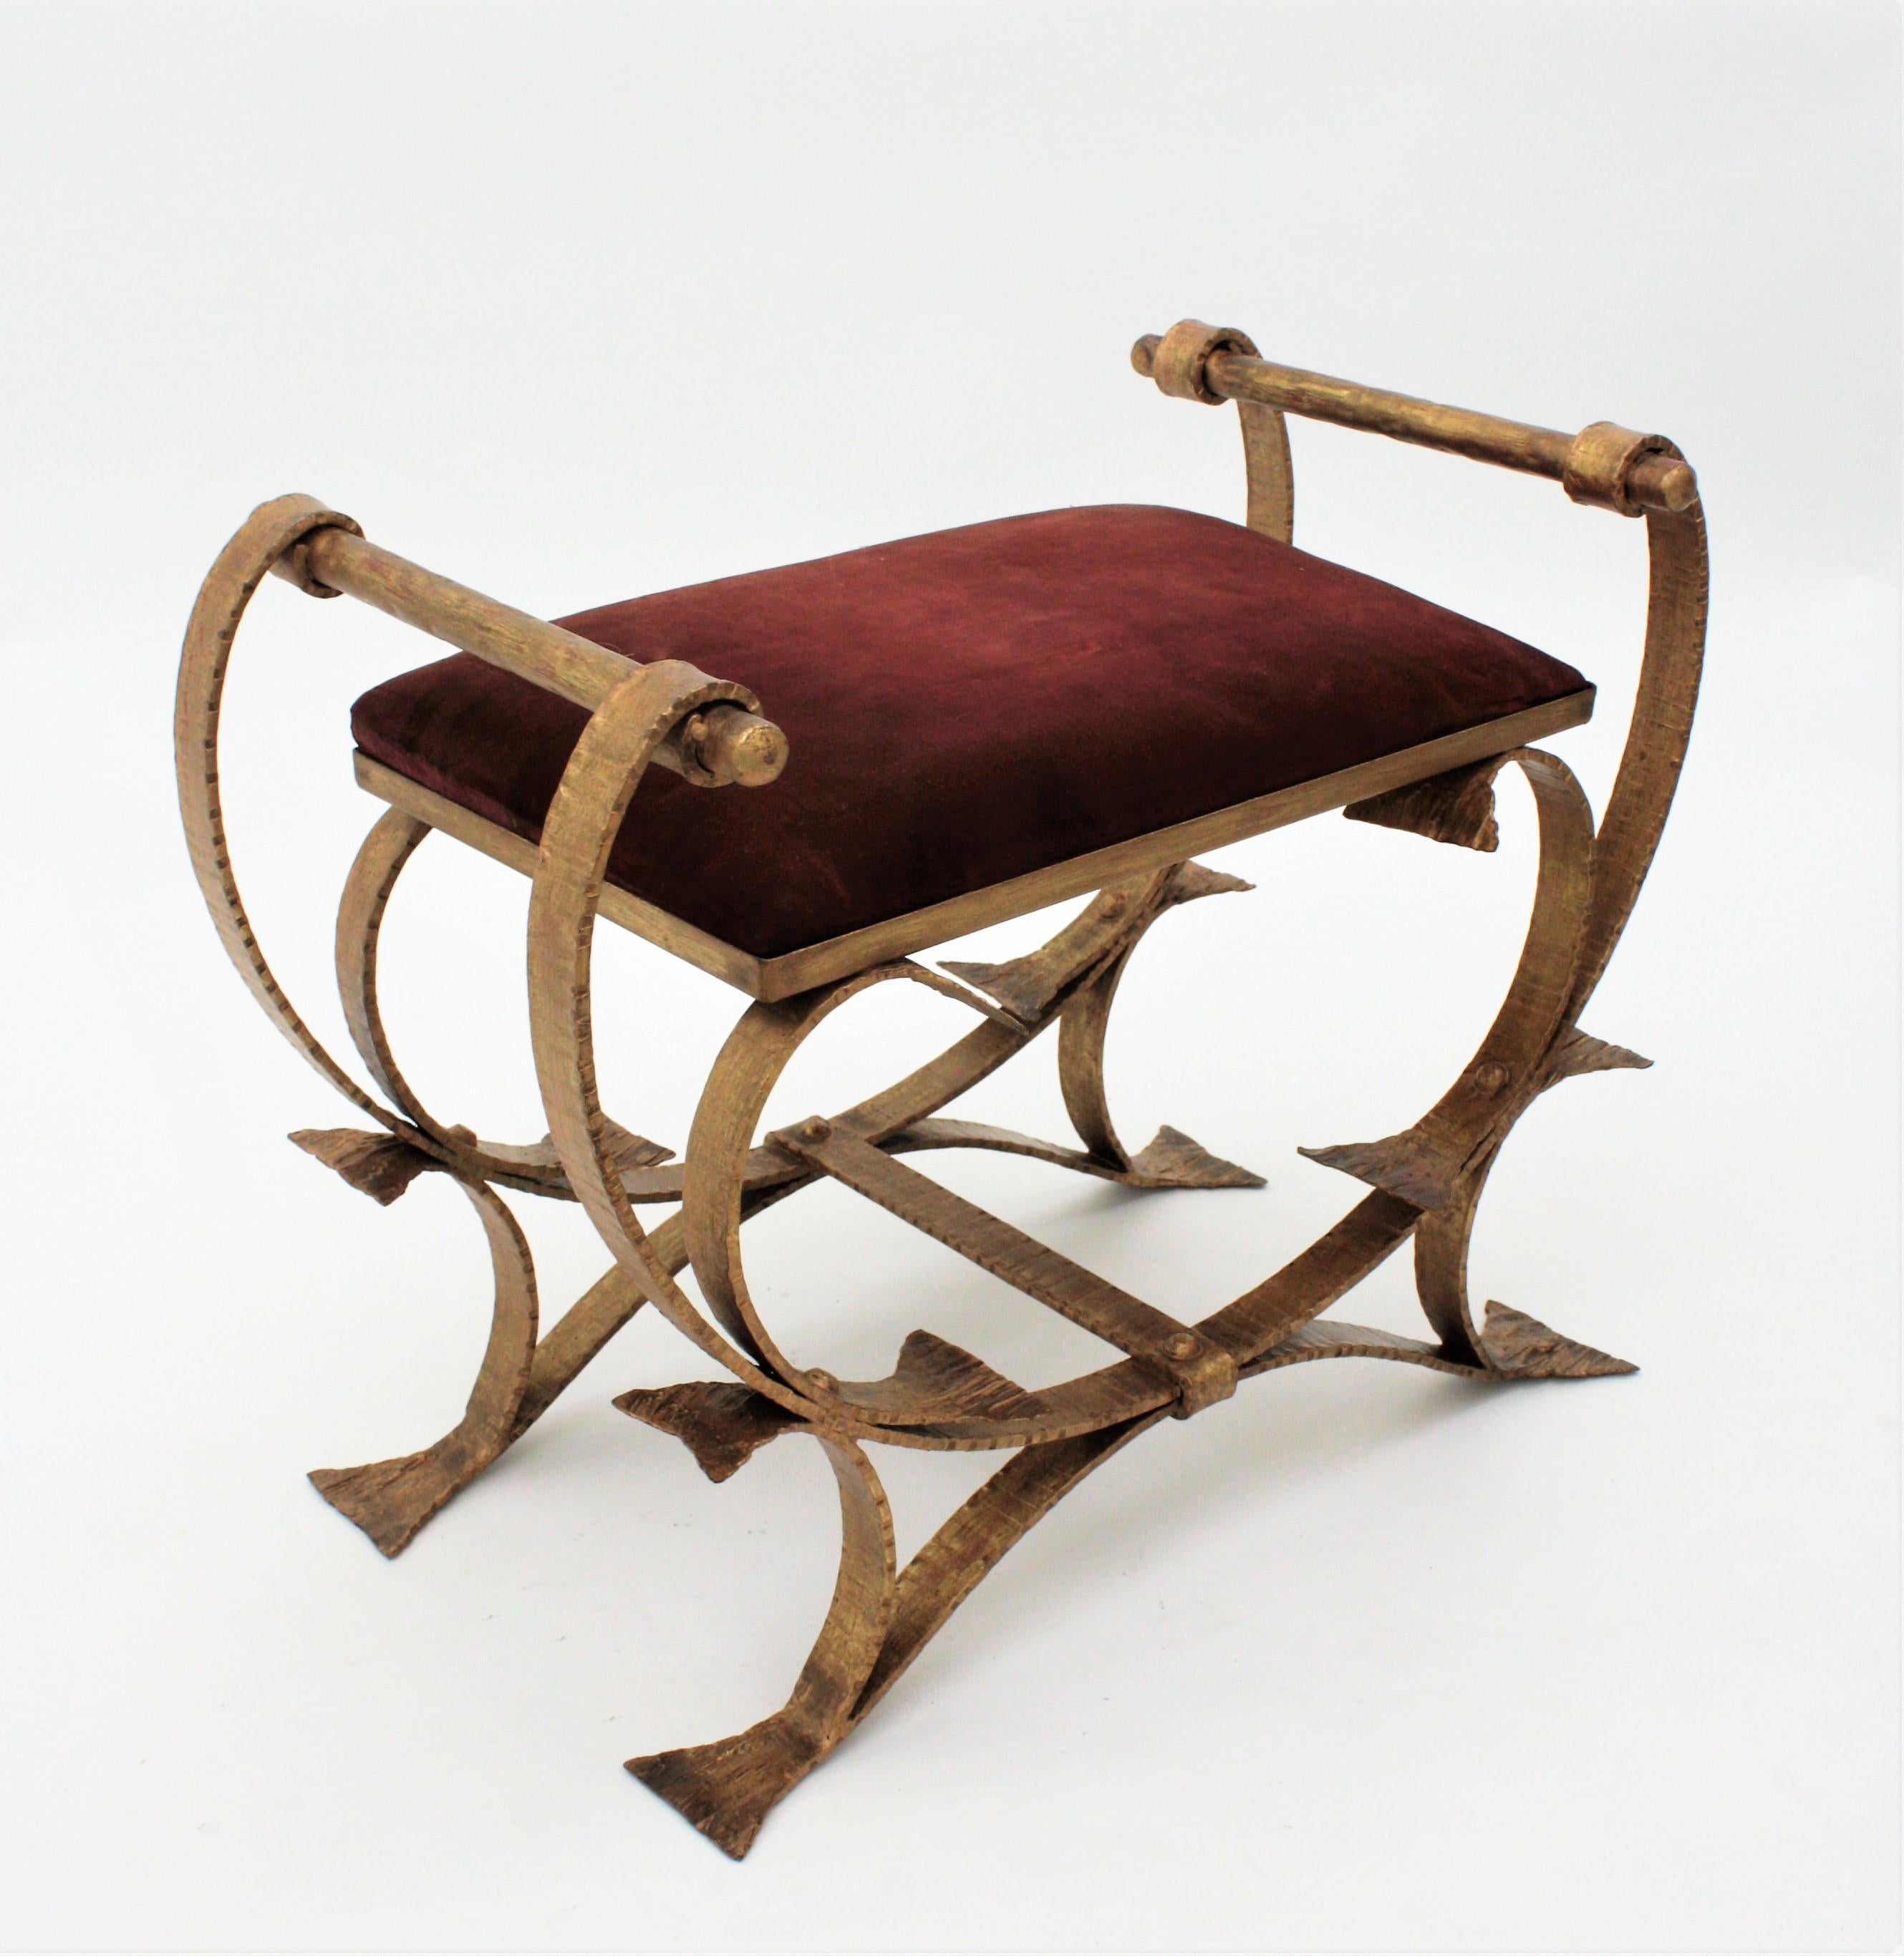 Sculptural hand forged iron stool with arms upholstered in burgundy red velvet, Spain, 1920s-1930s.
This gorgeous two handled bench is beautifully constructed in hand forged iron finished in gold leaf gilding.
Wearing its original burgundy velvet